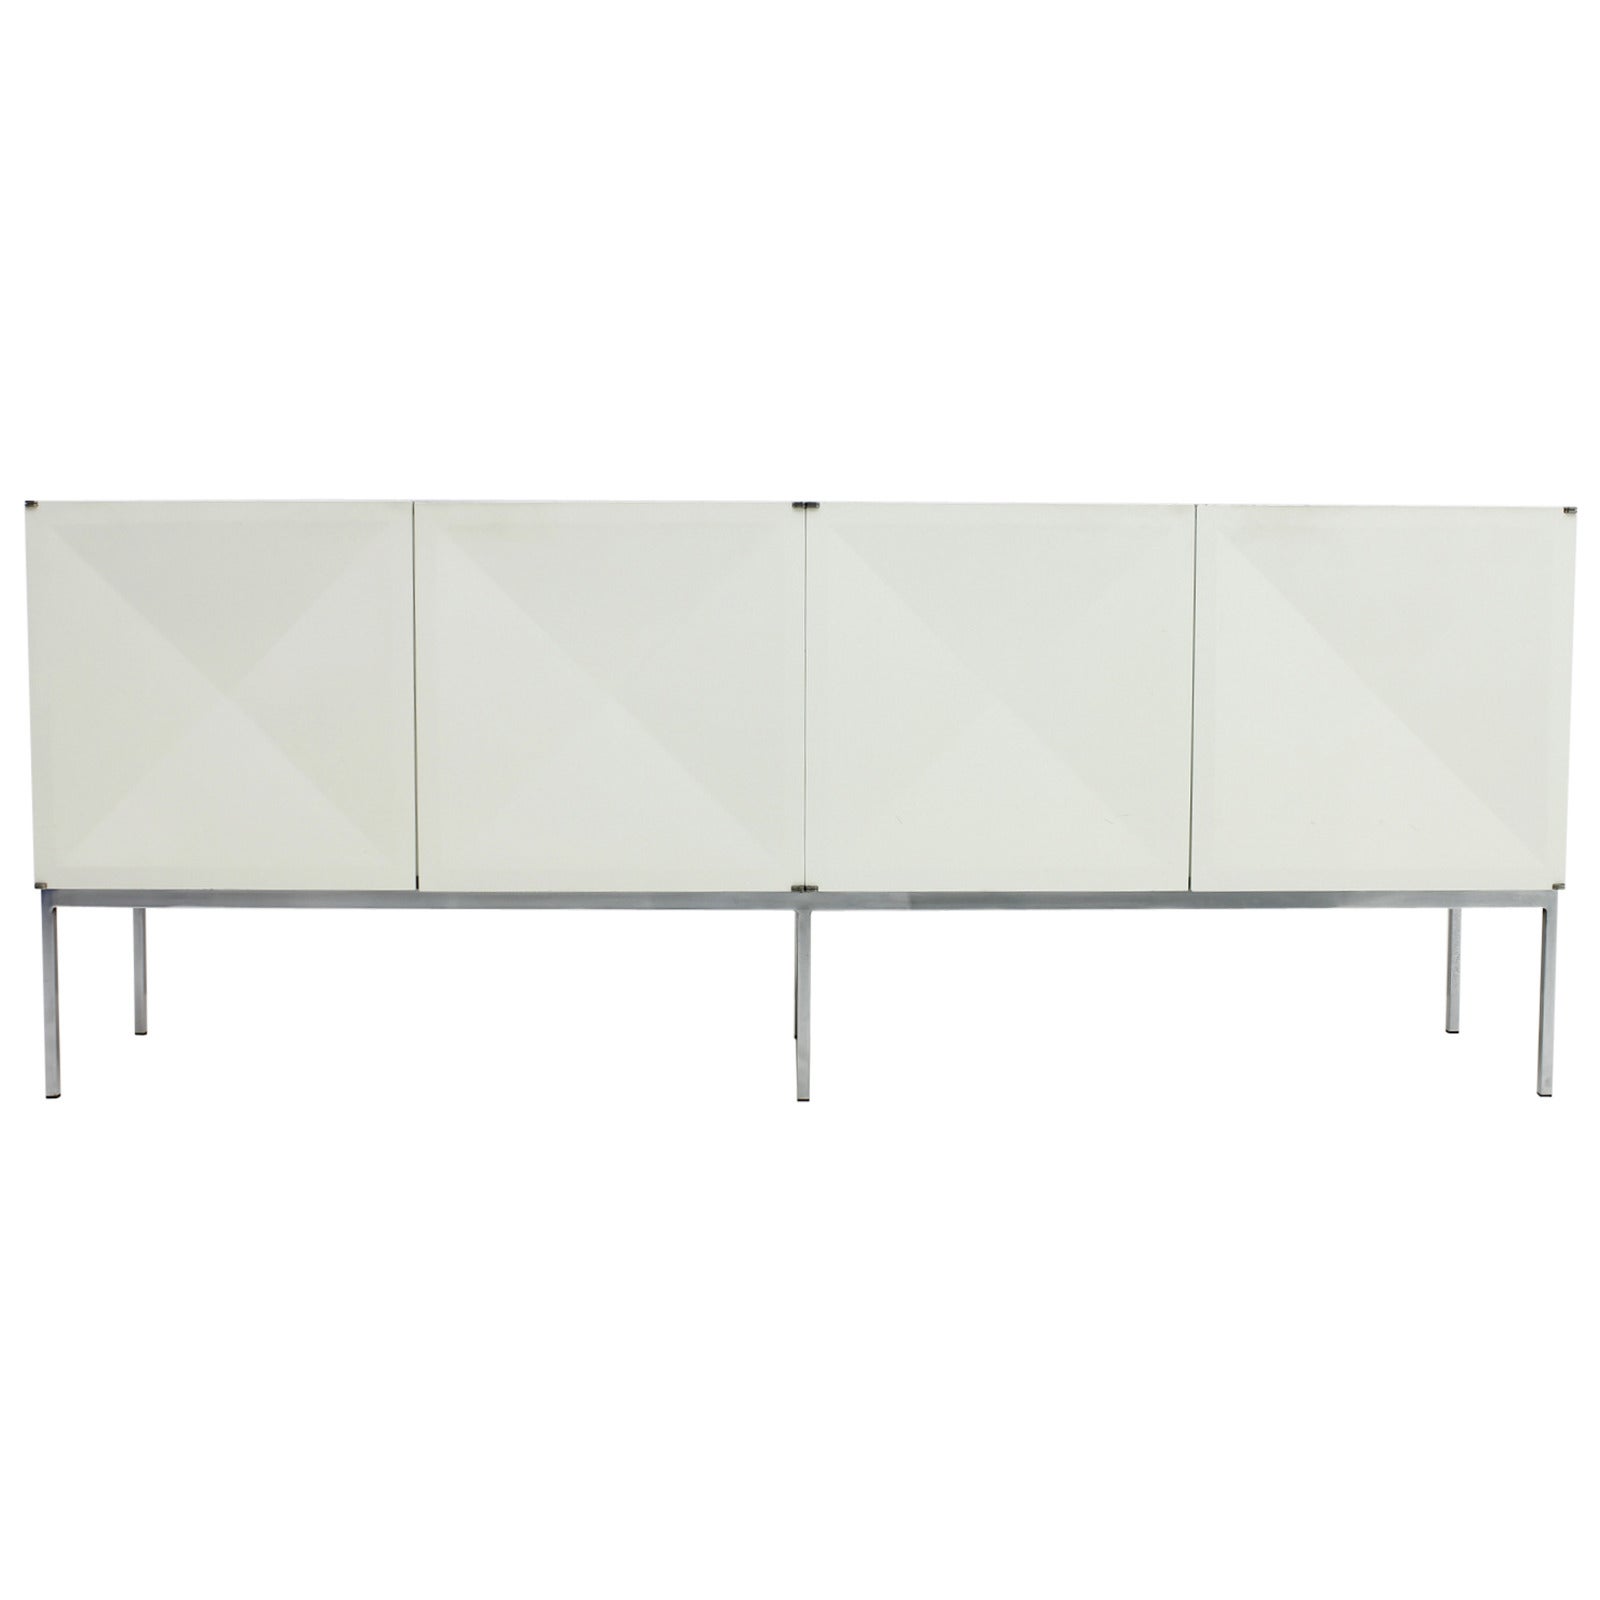 Philippon and Lecoq Sideboard Mahogany with White Doors by Behr 1962